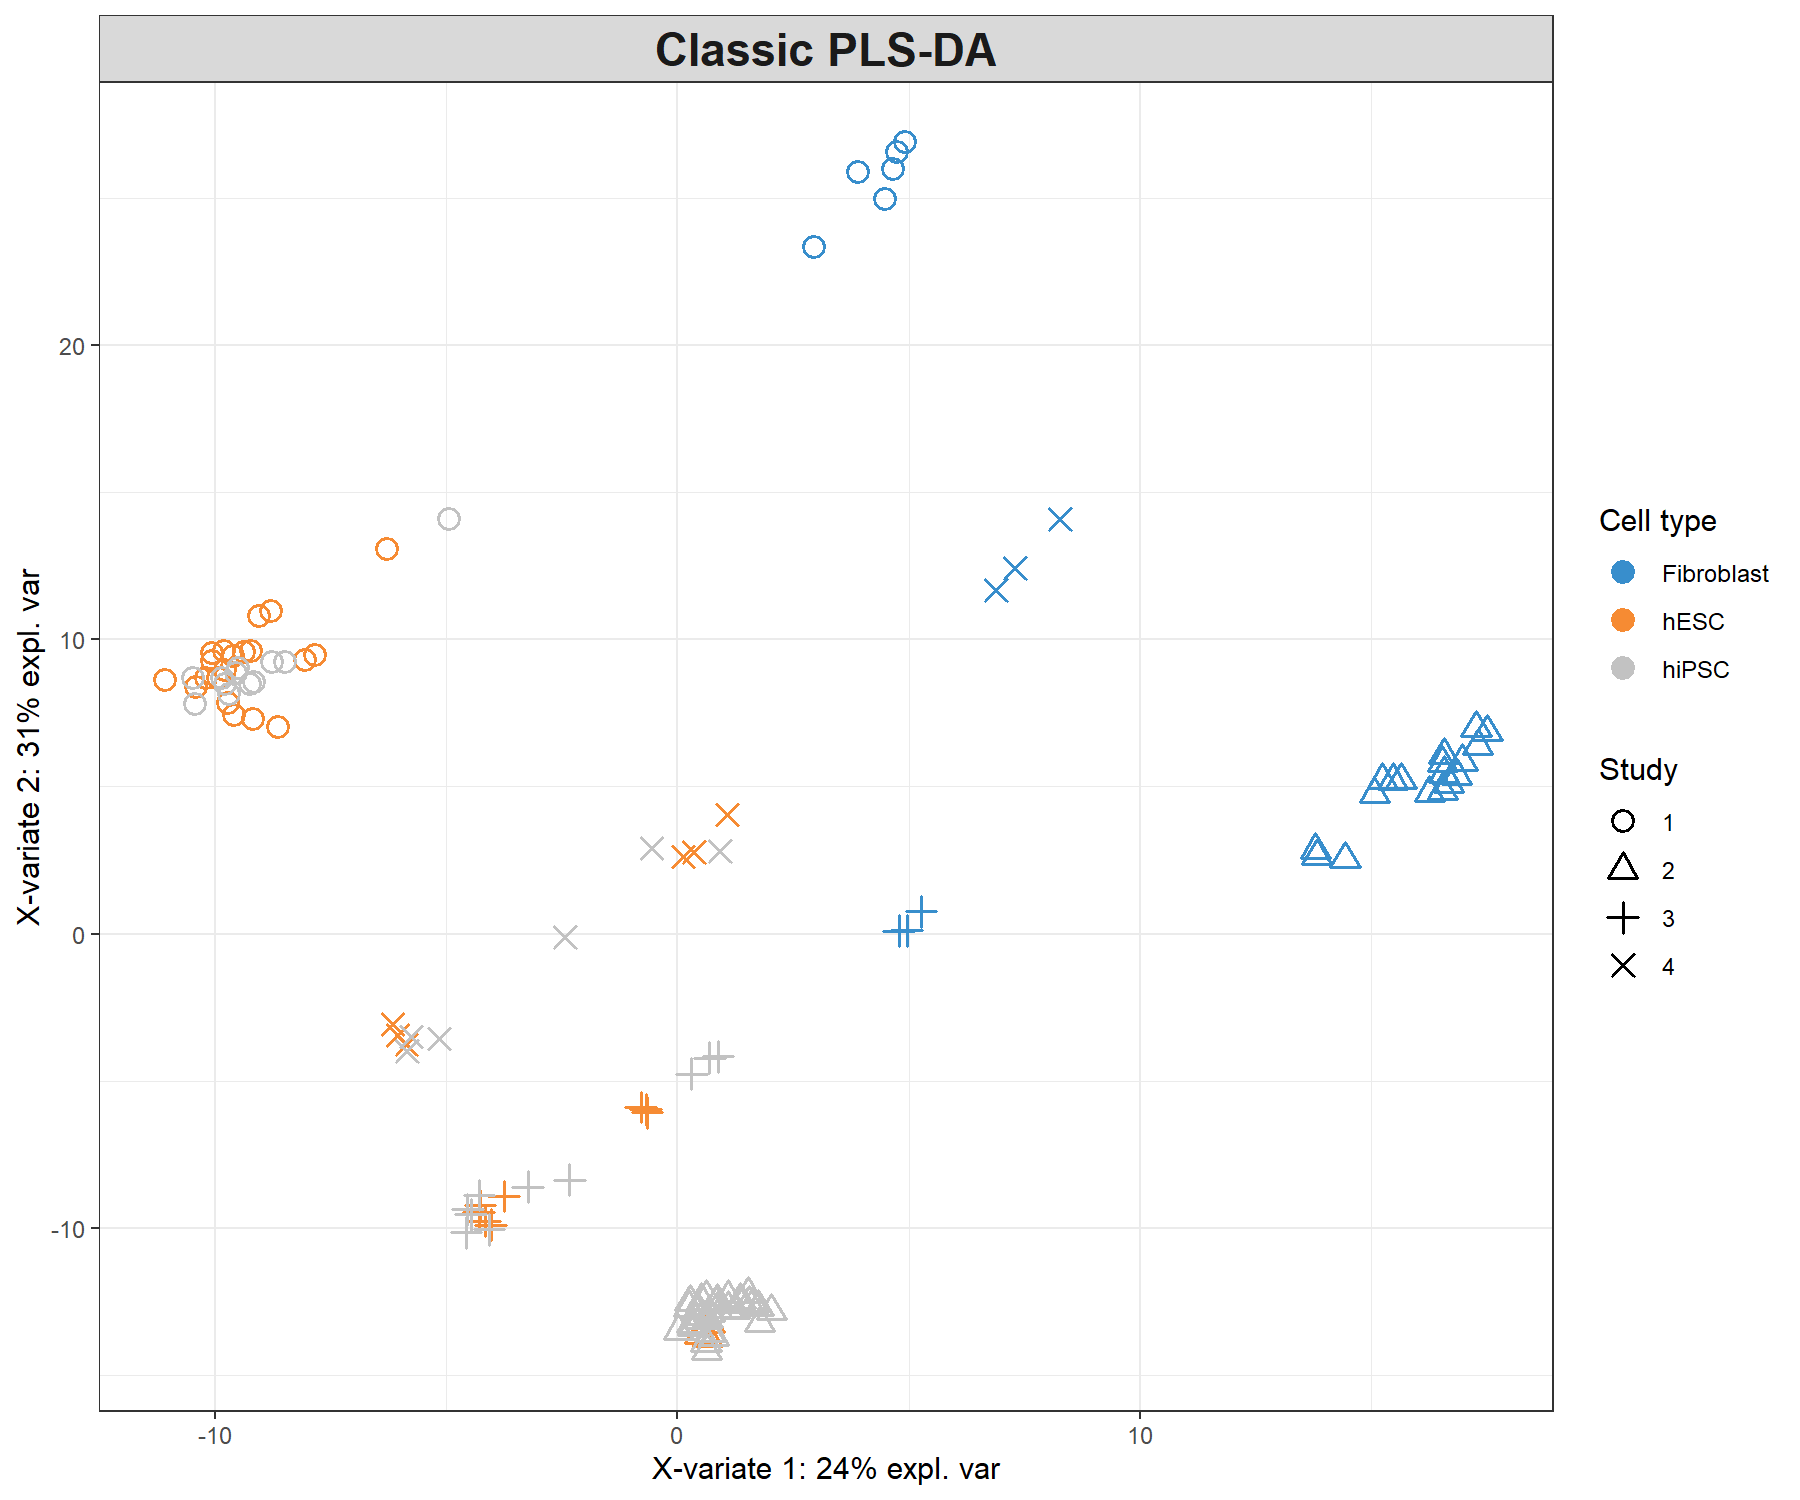 Sample plot from a classic PLS-DA performed on the stemcells gene expression data that highlights the study effect (indicated by symbols). Samples are projected into the space spanned by the first two components. We still do observe some discrimination between the cell types.